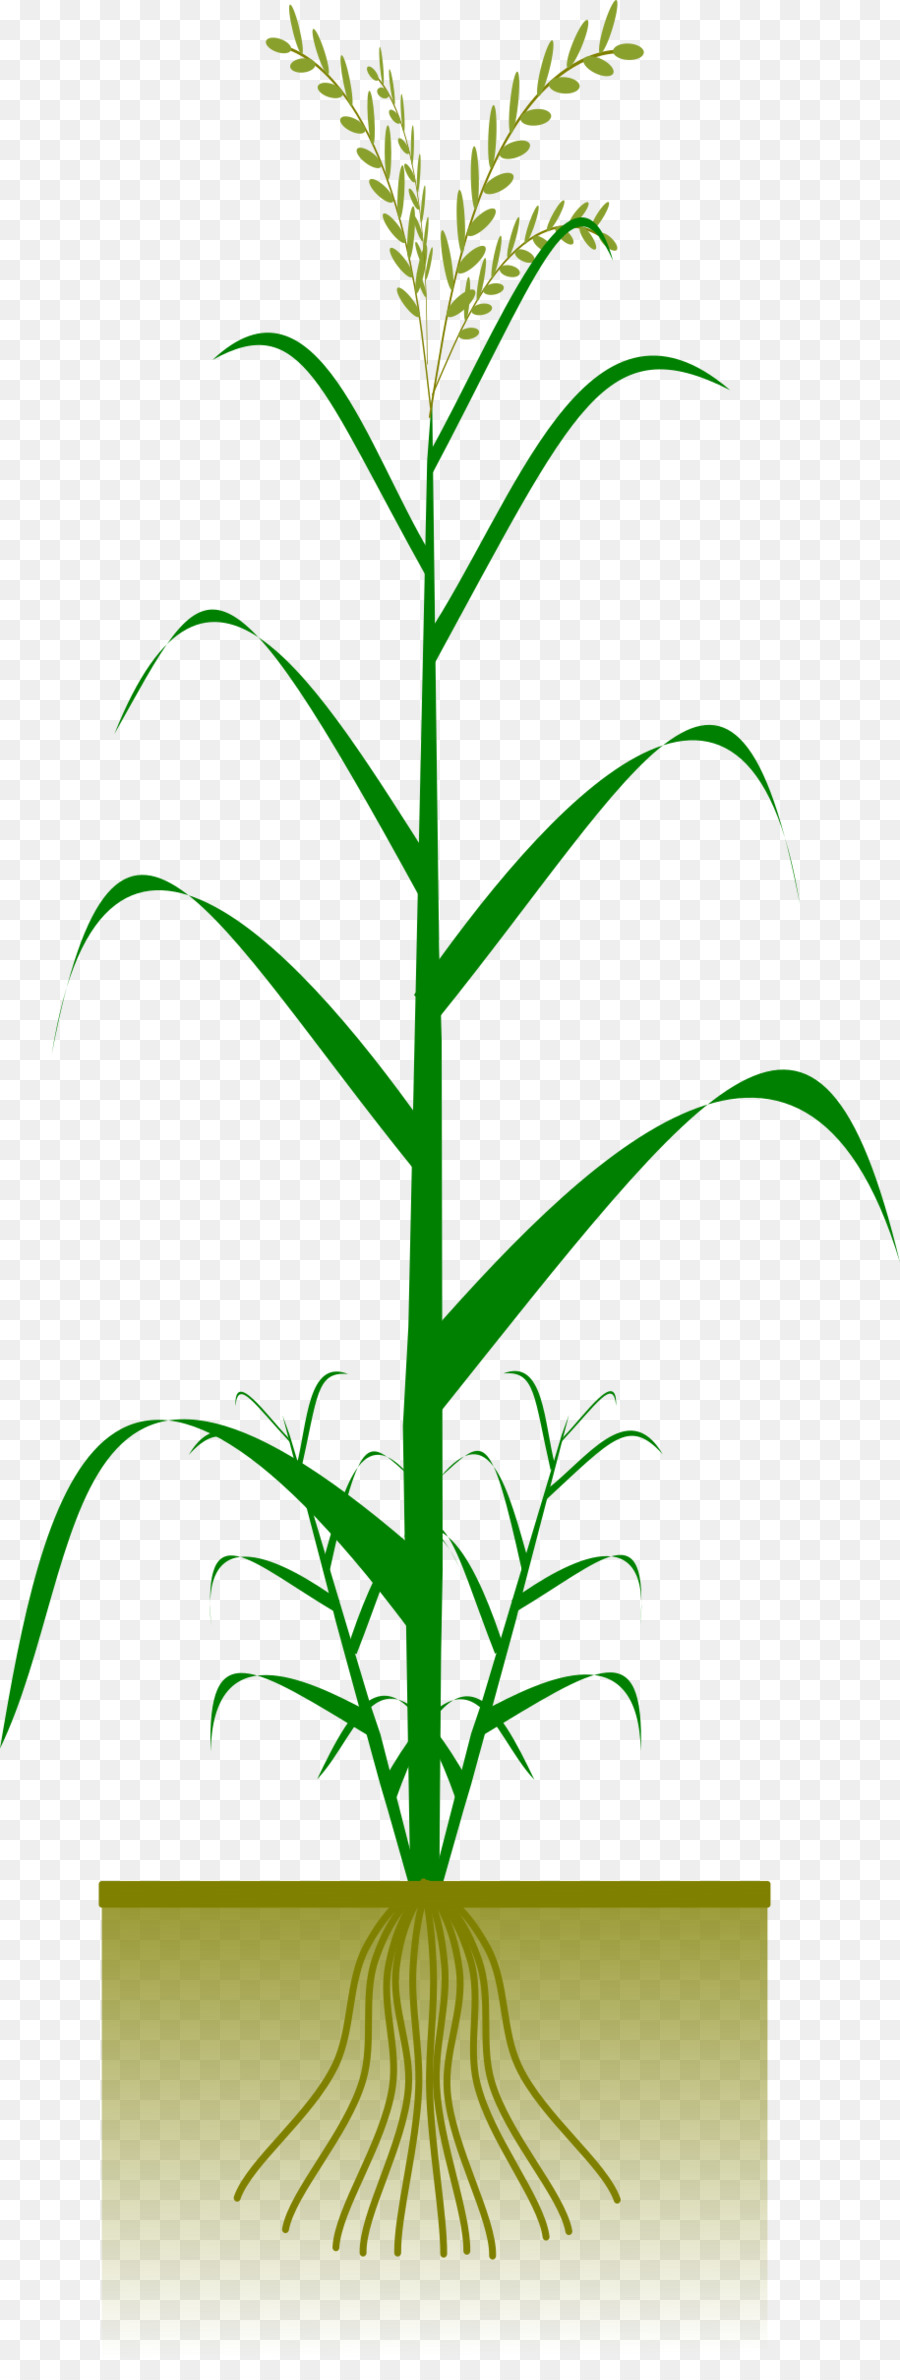 cereal clipart rice plant